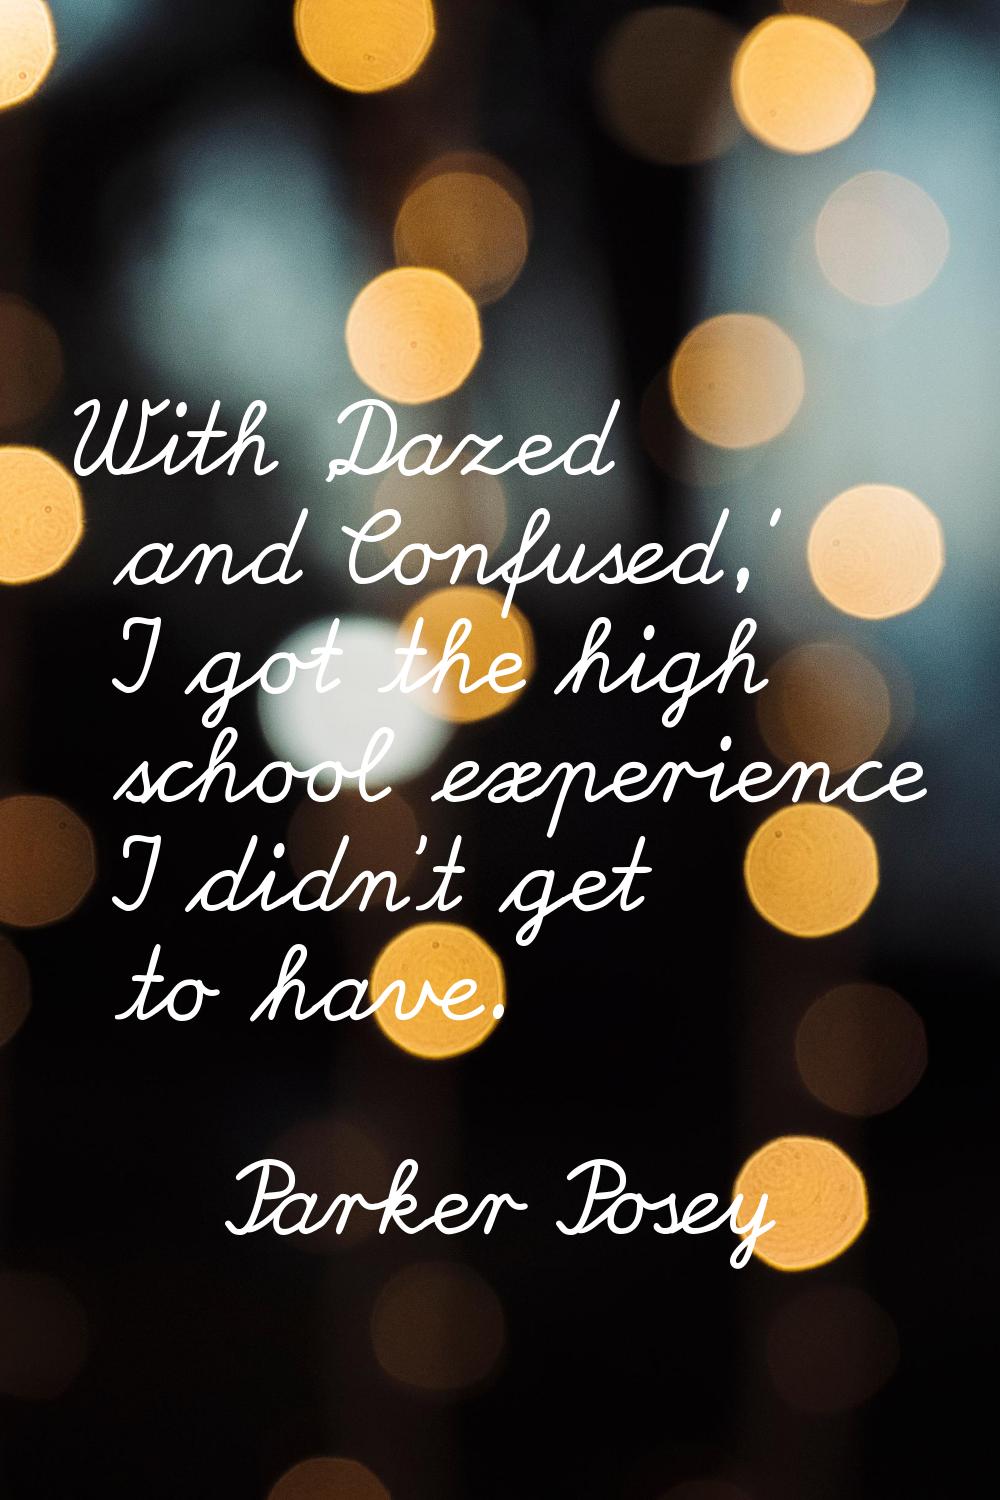 With 'Dazed and Confused,' I got the high school experience I didn't get to have.